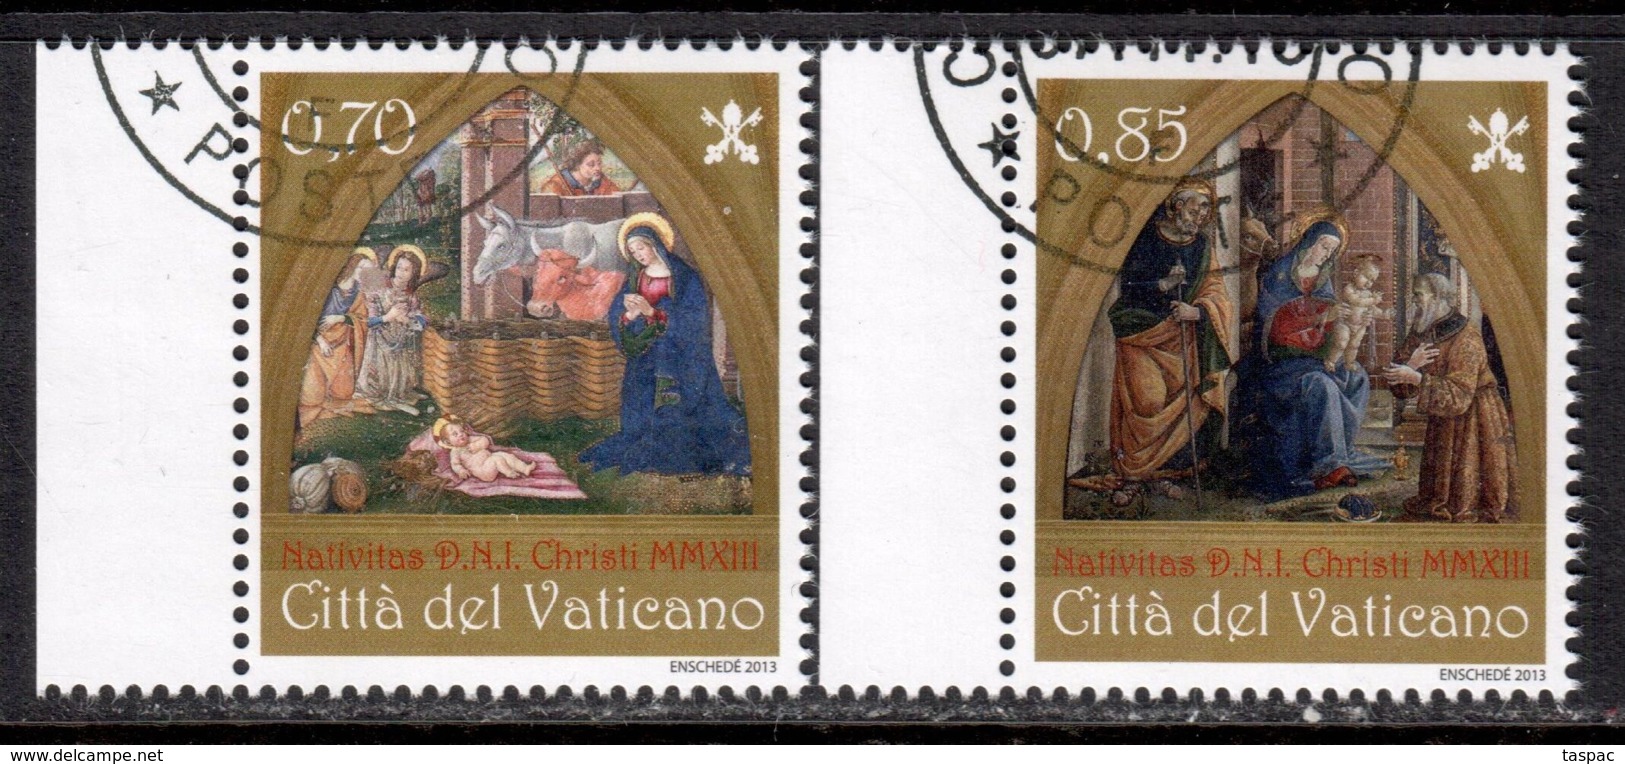 Vatican 2013 Mi# 1792-1793 Used - Christmas / Paintings By Pinturicchio - Used Stamps